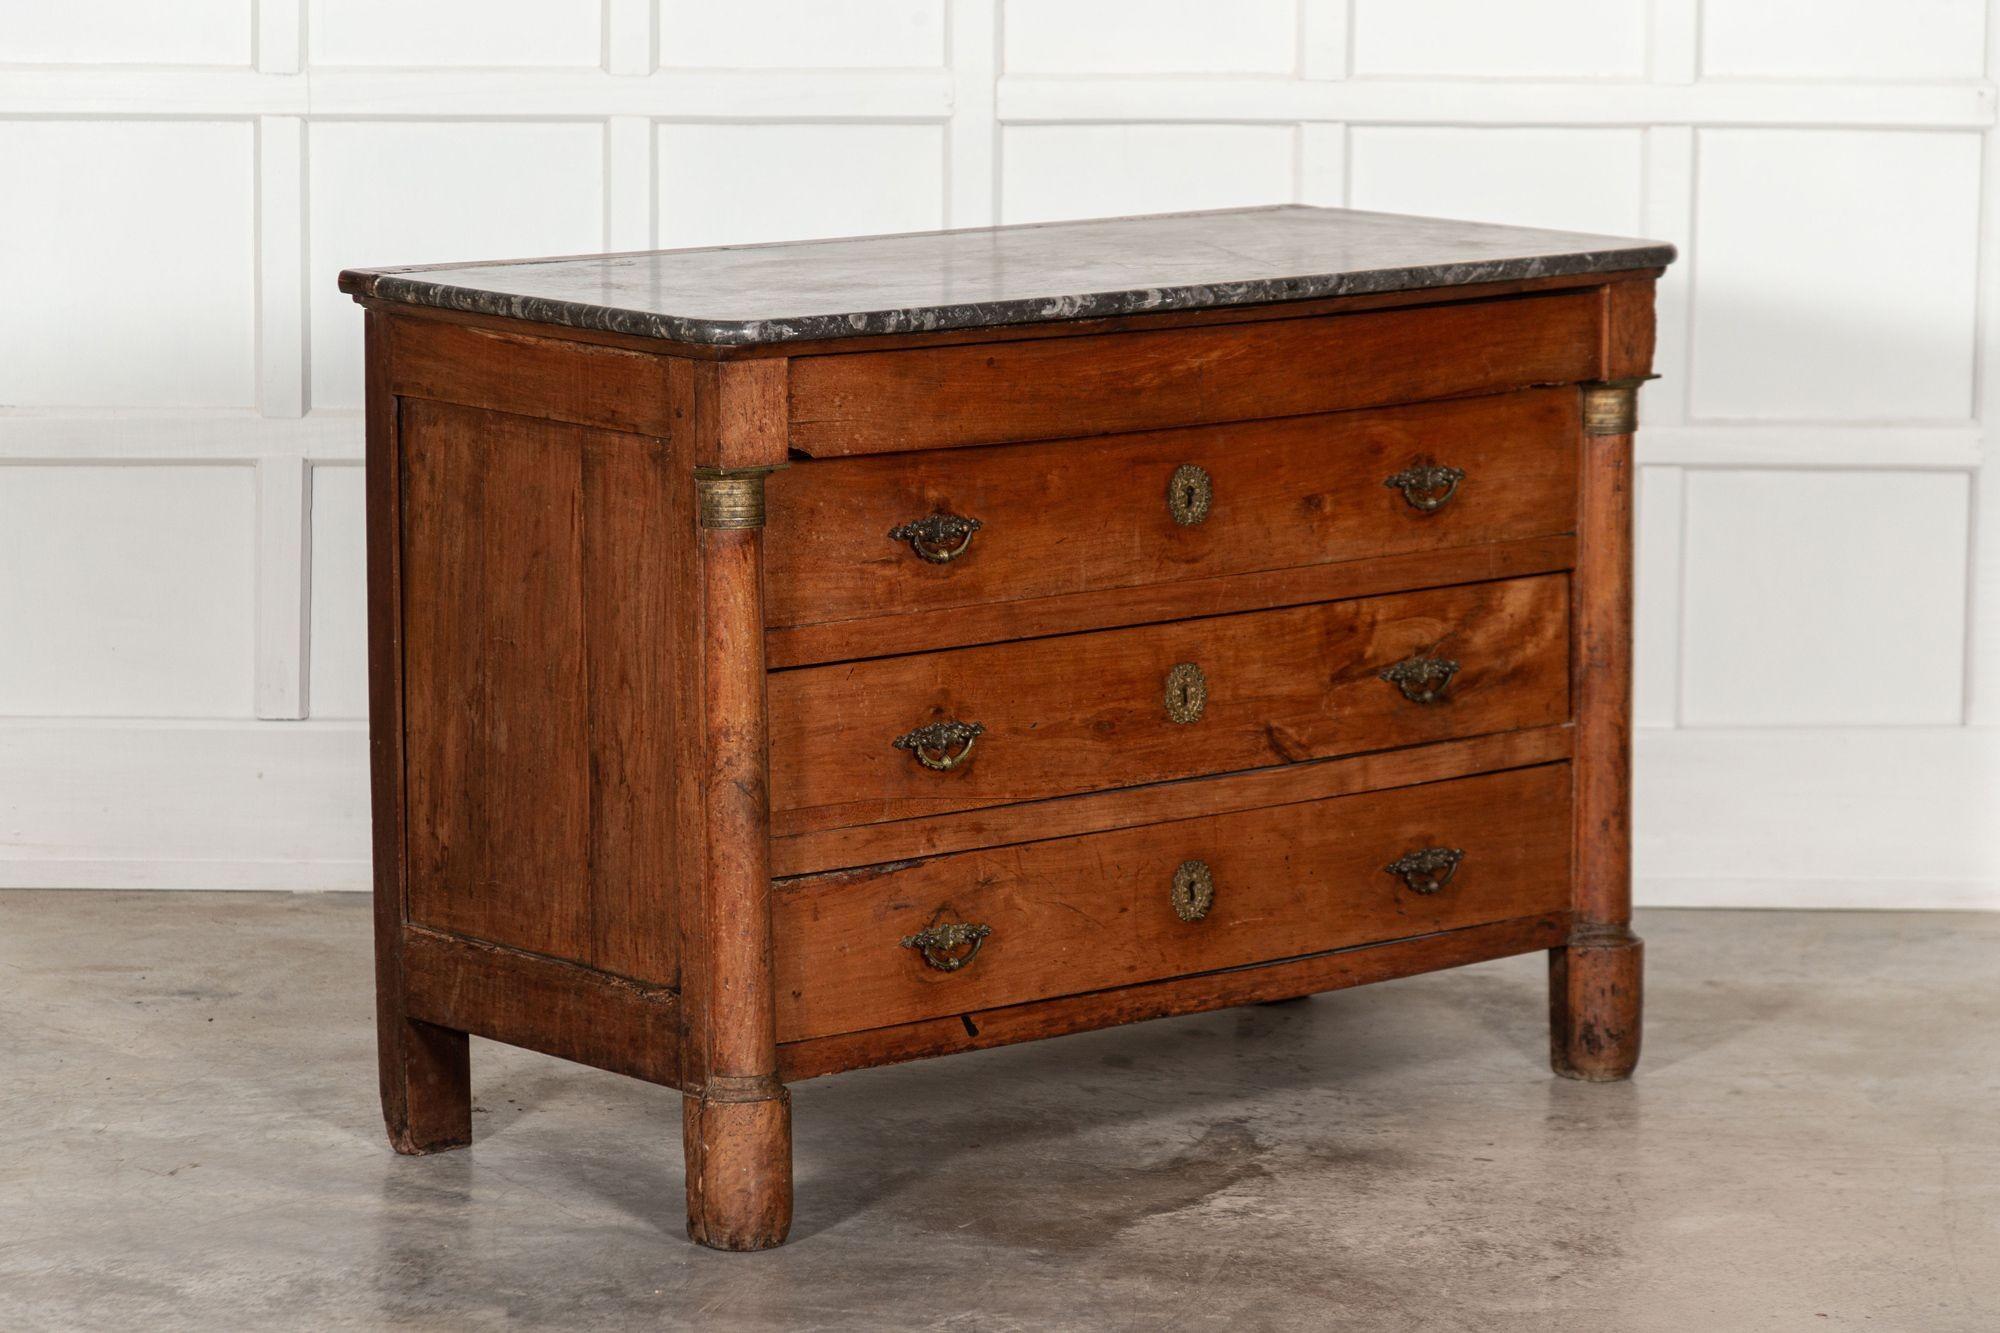 circa 1830
19th century French marble empire fruitwood commode
Sourced from the South of France
sku 1431F
Measures: W130 x D60 x H87cm.